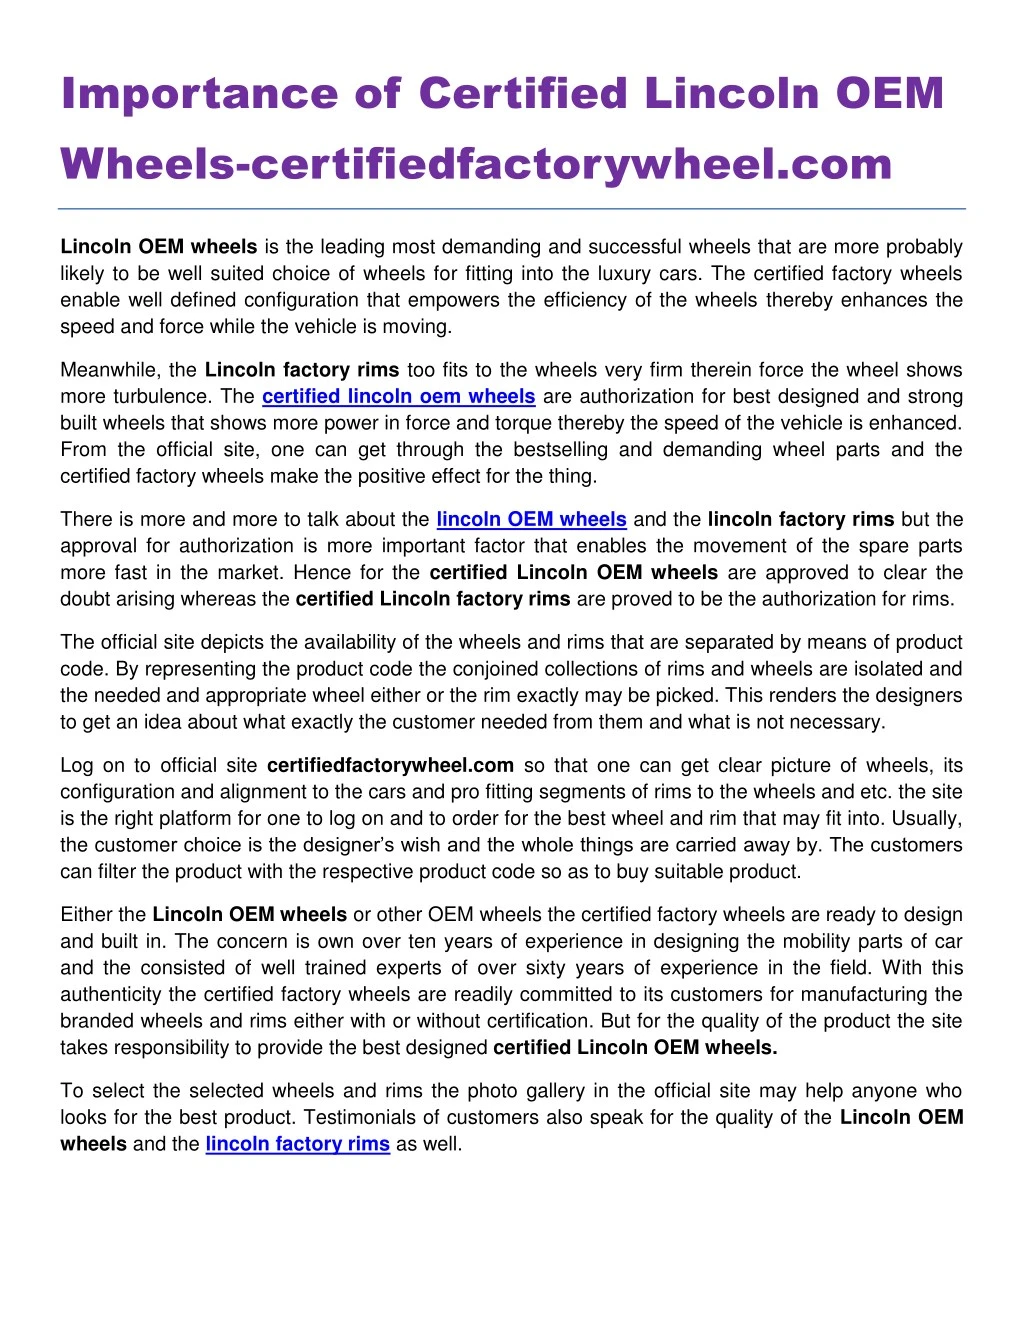 importance of certified lincoln oem wheels